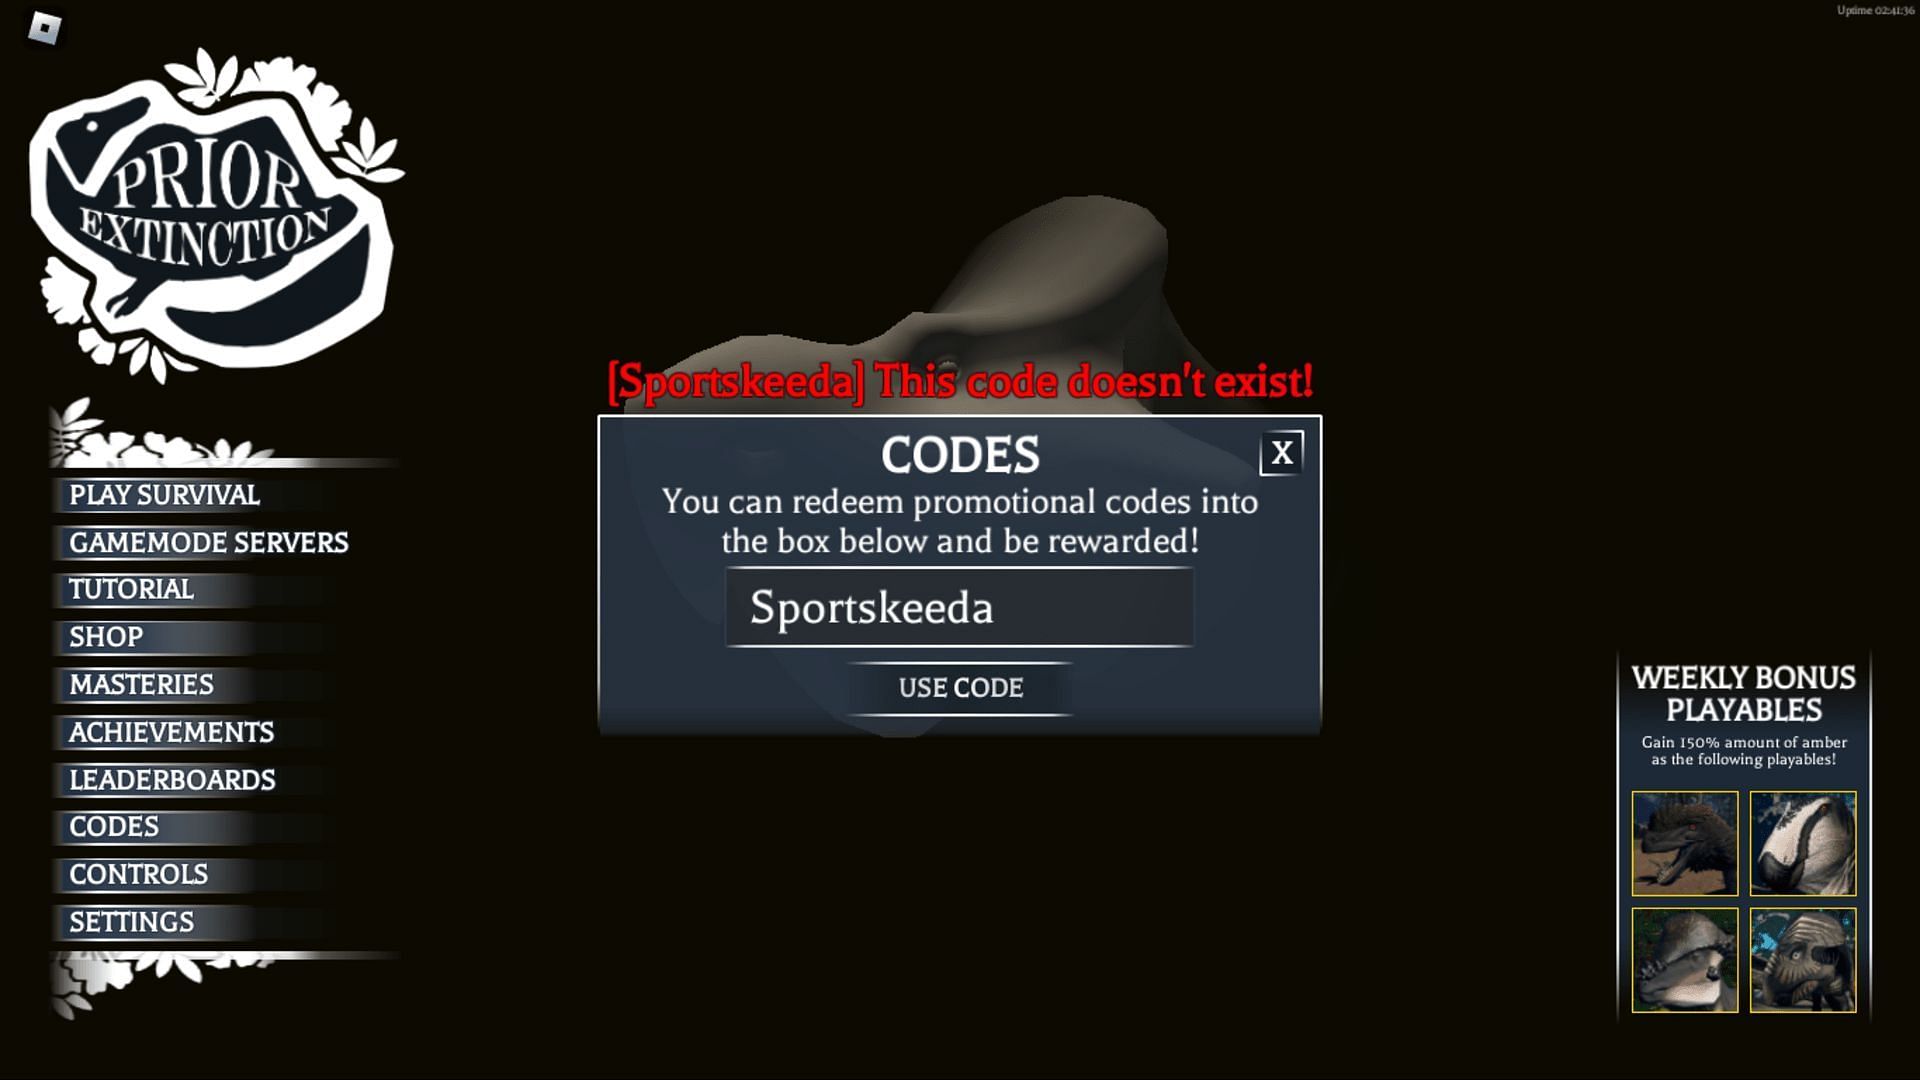 Troubleshoot codes in Prior Extinction with ease (Image via Roblox)